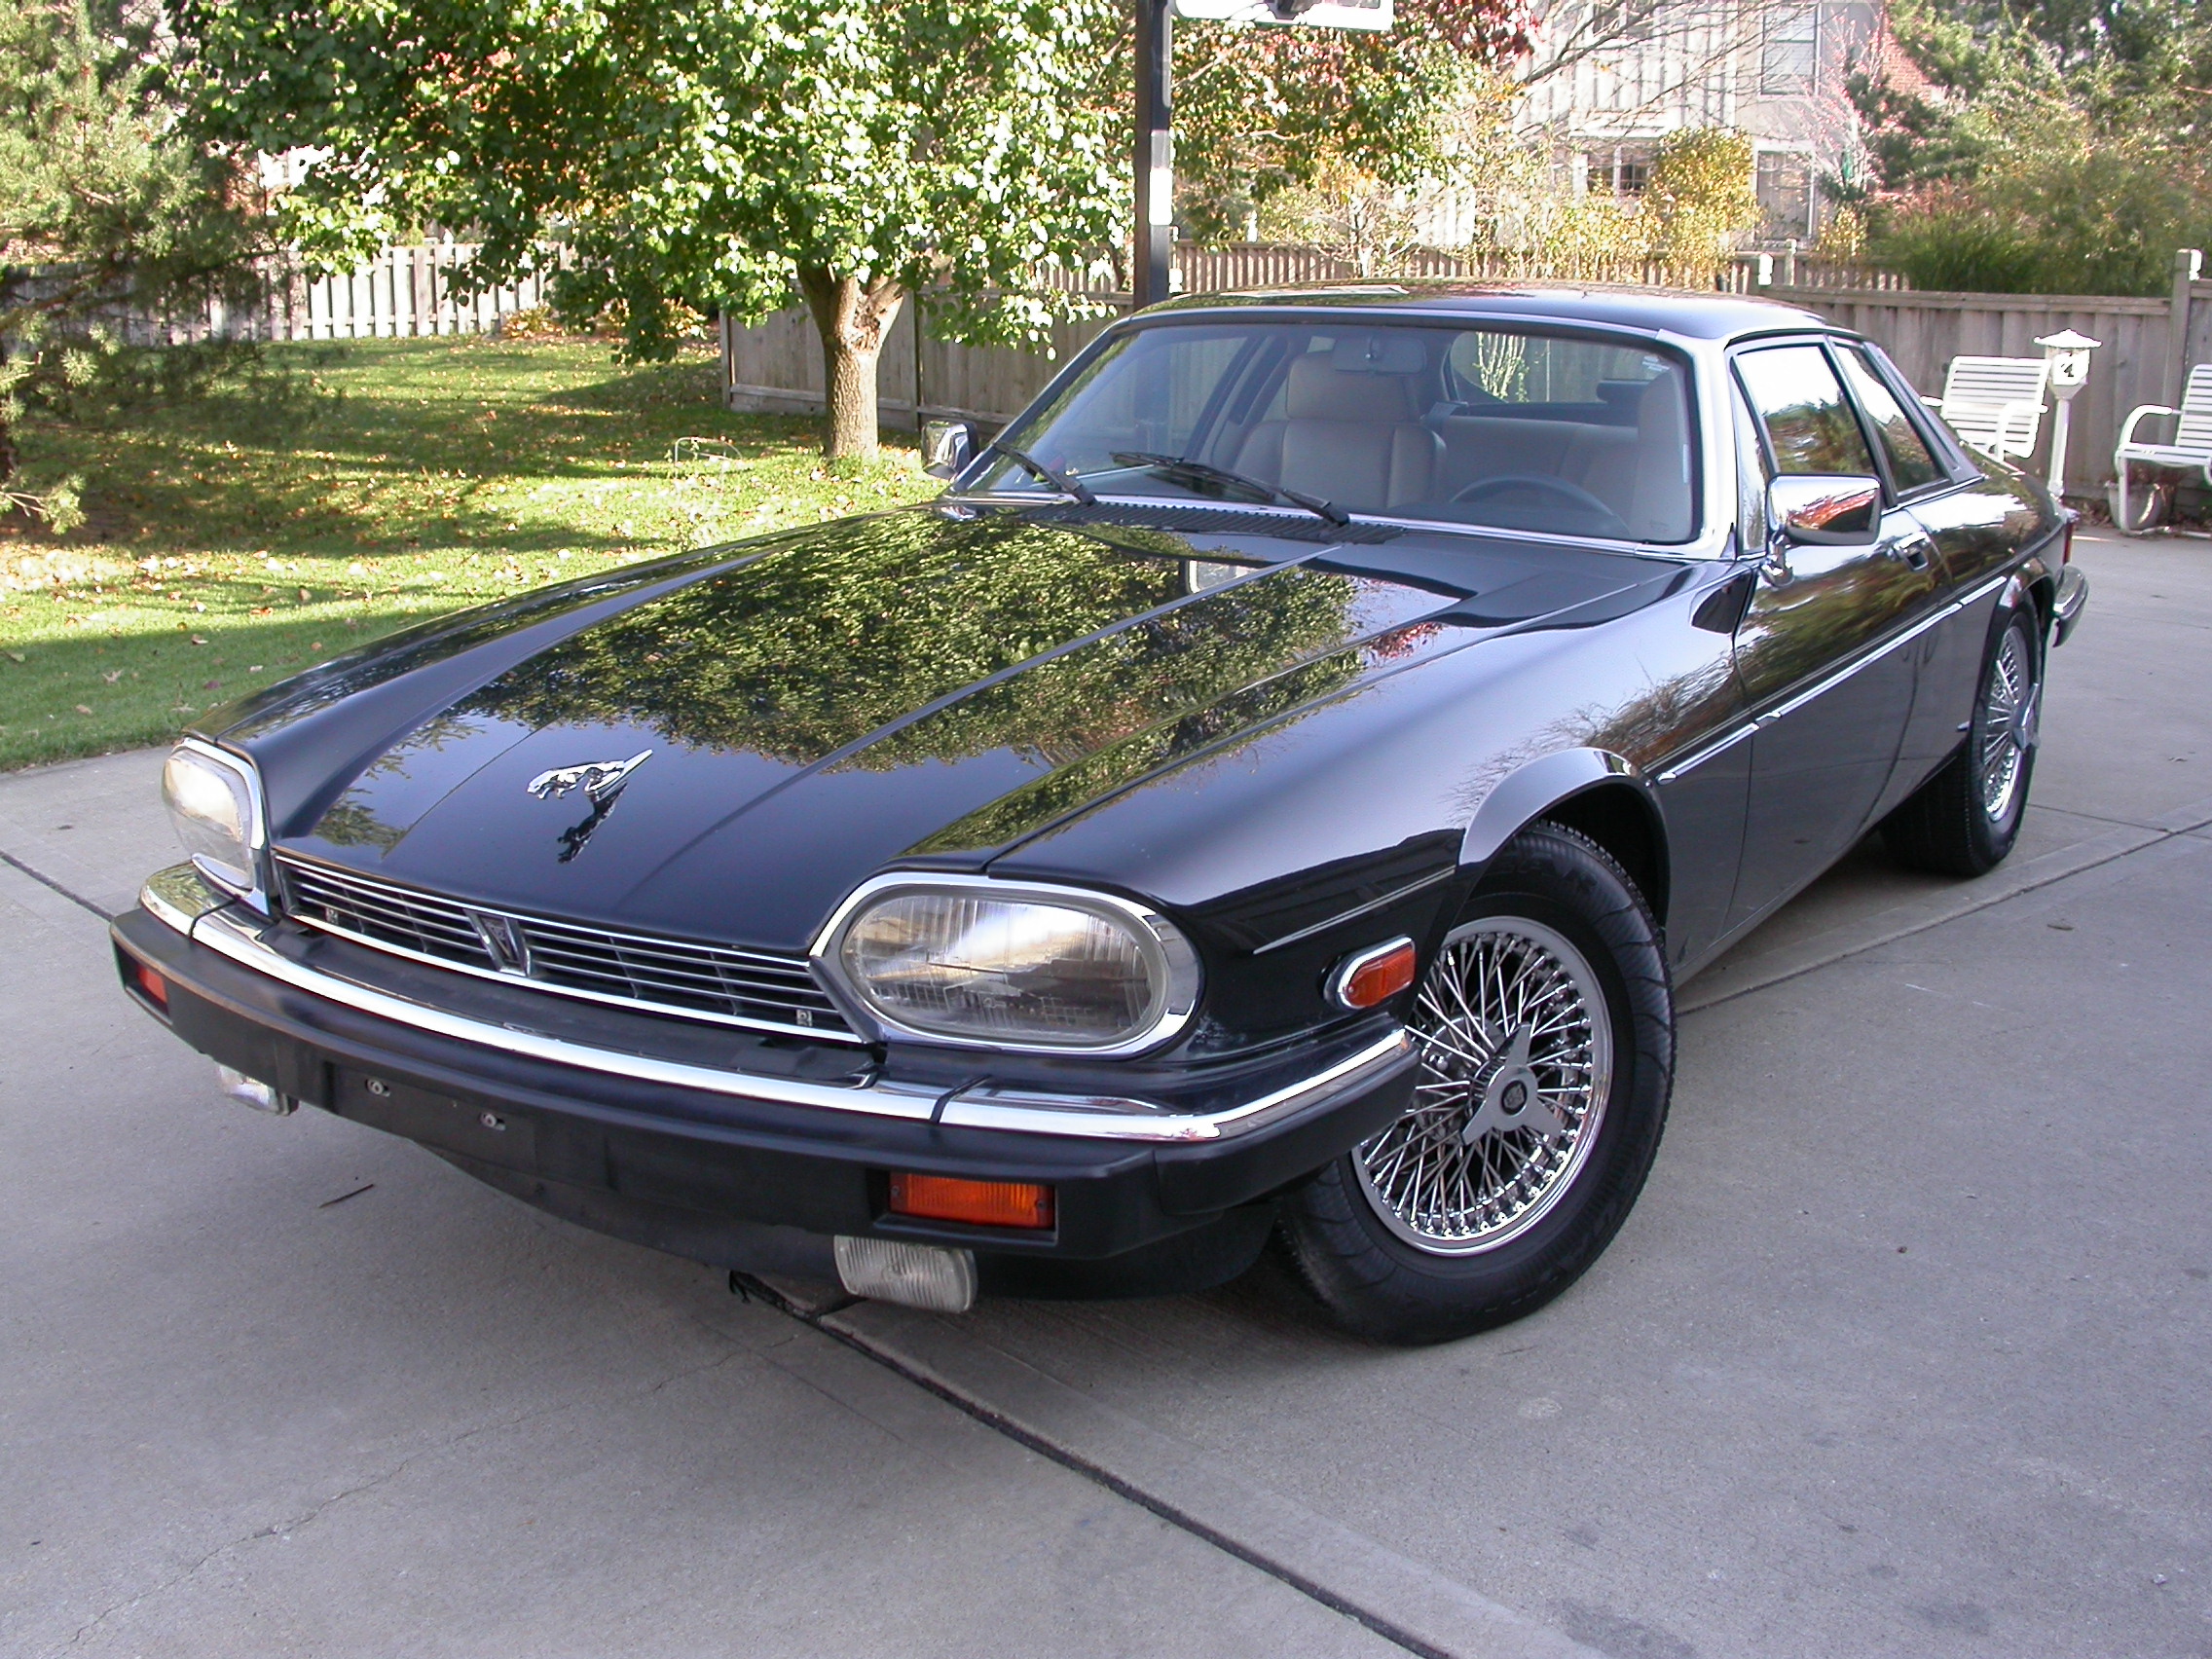 xjs Car Wallpapers For The AndroidIphone 6 Samsung S5 Desktop